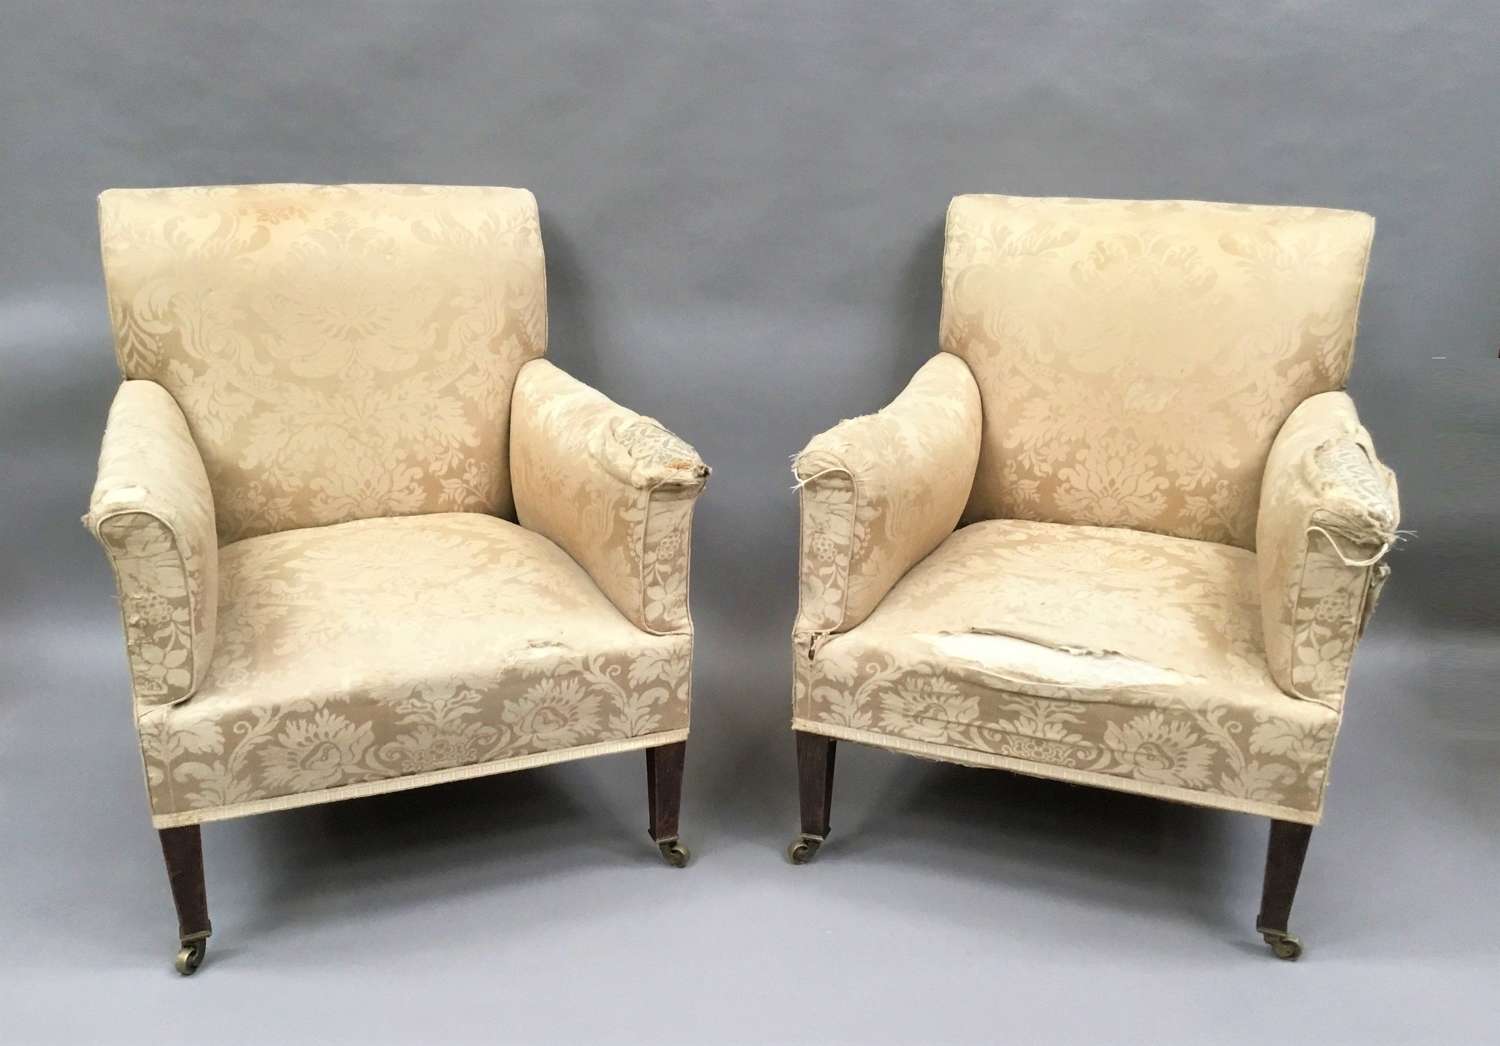 C19th Howard and Sons pair of upholstered library chairs / armchair